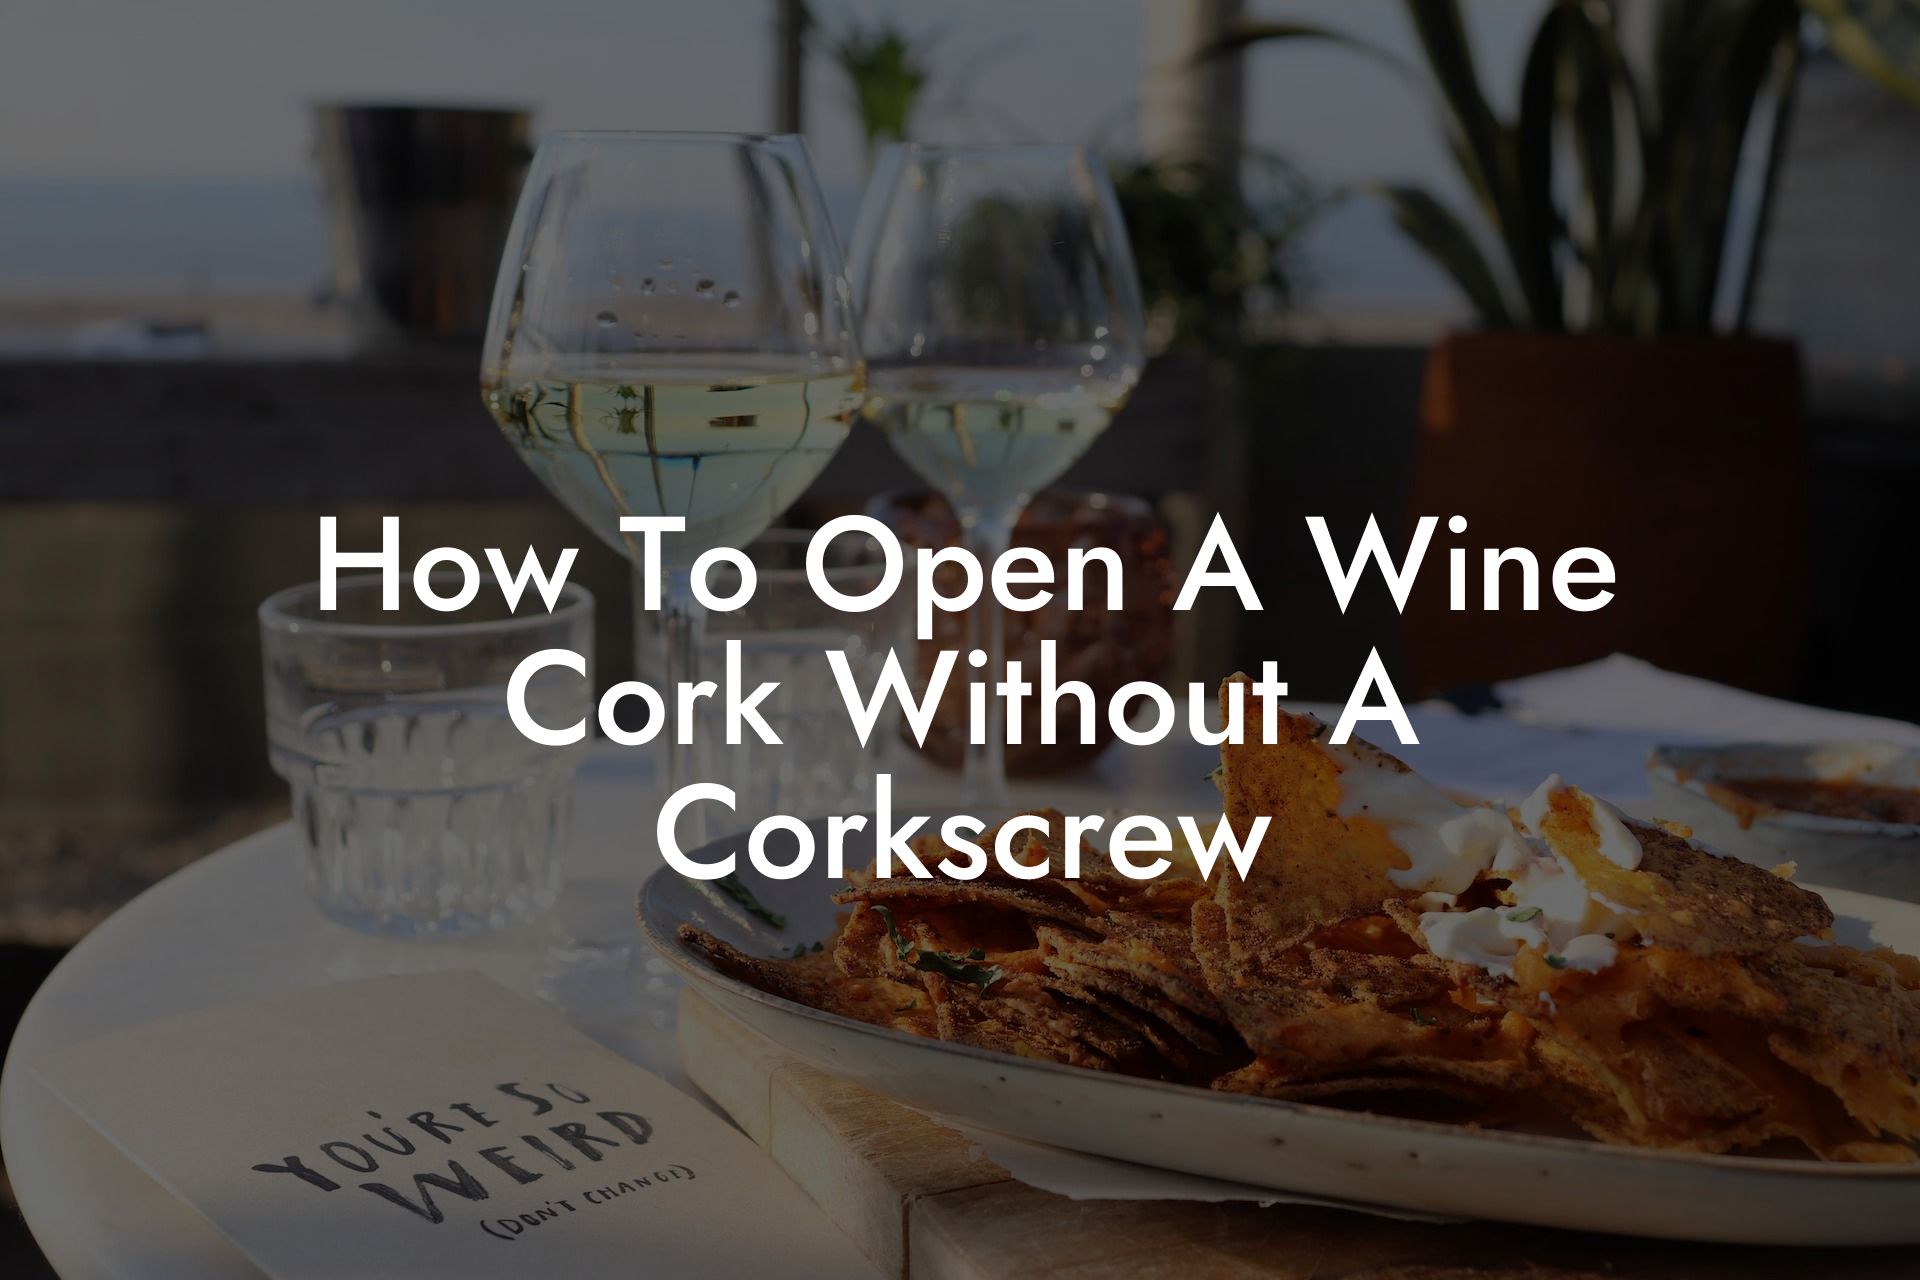 How To Open A Wine Cork Without A Corkscrew